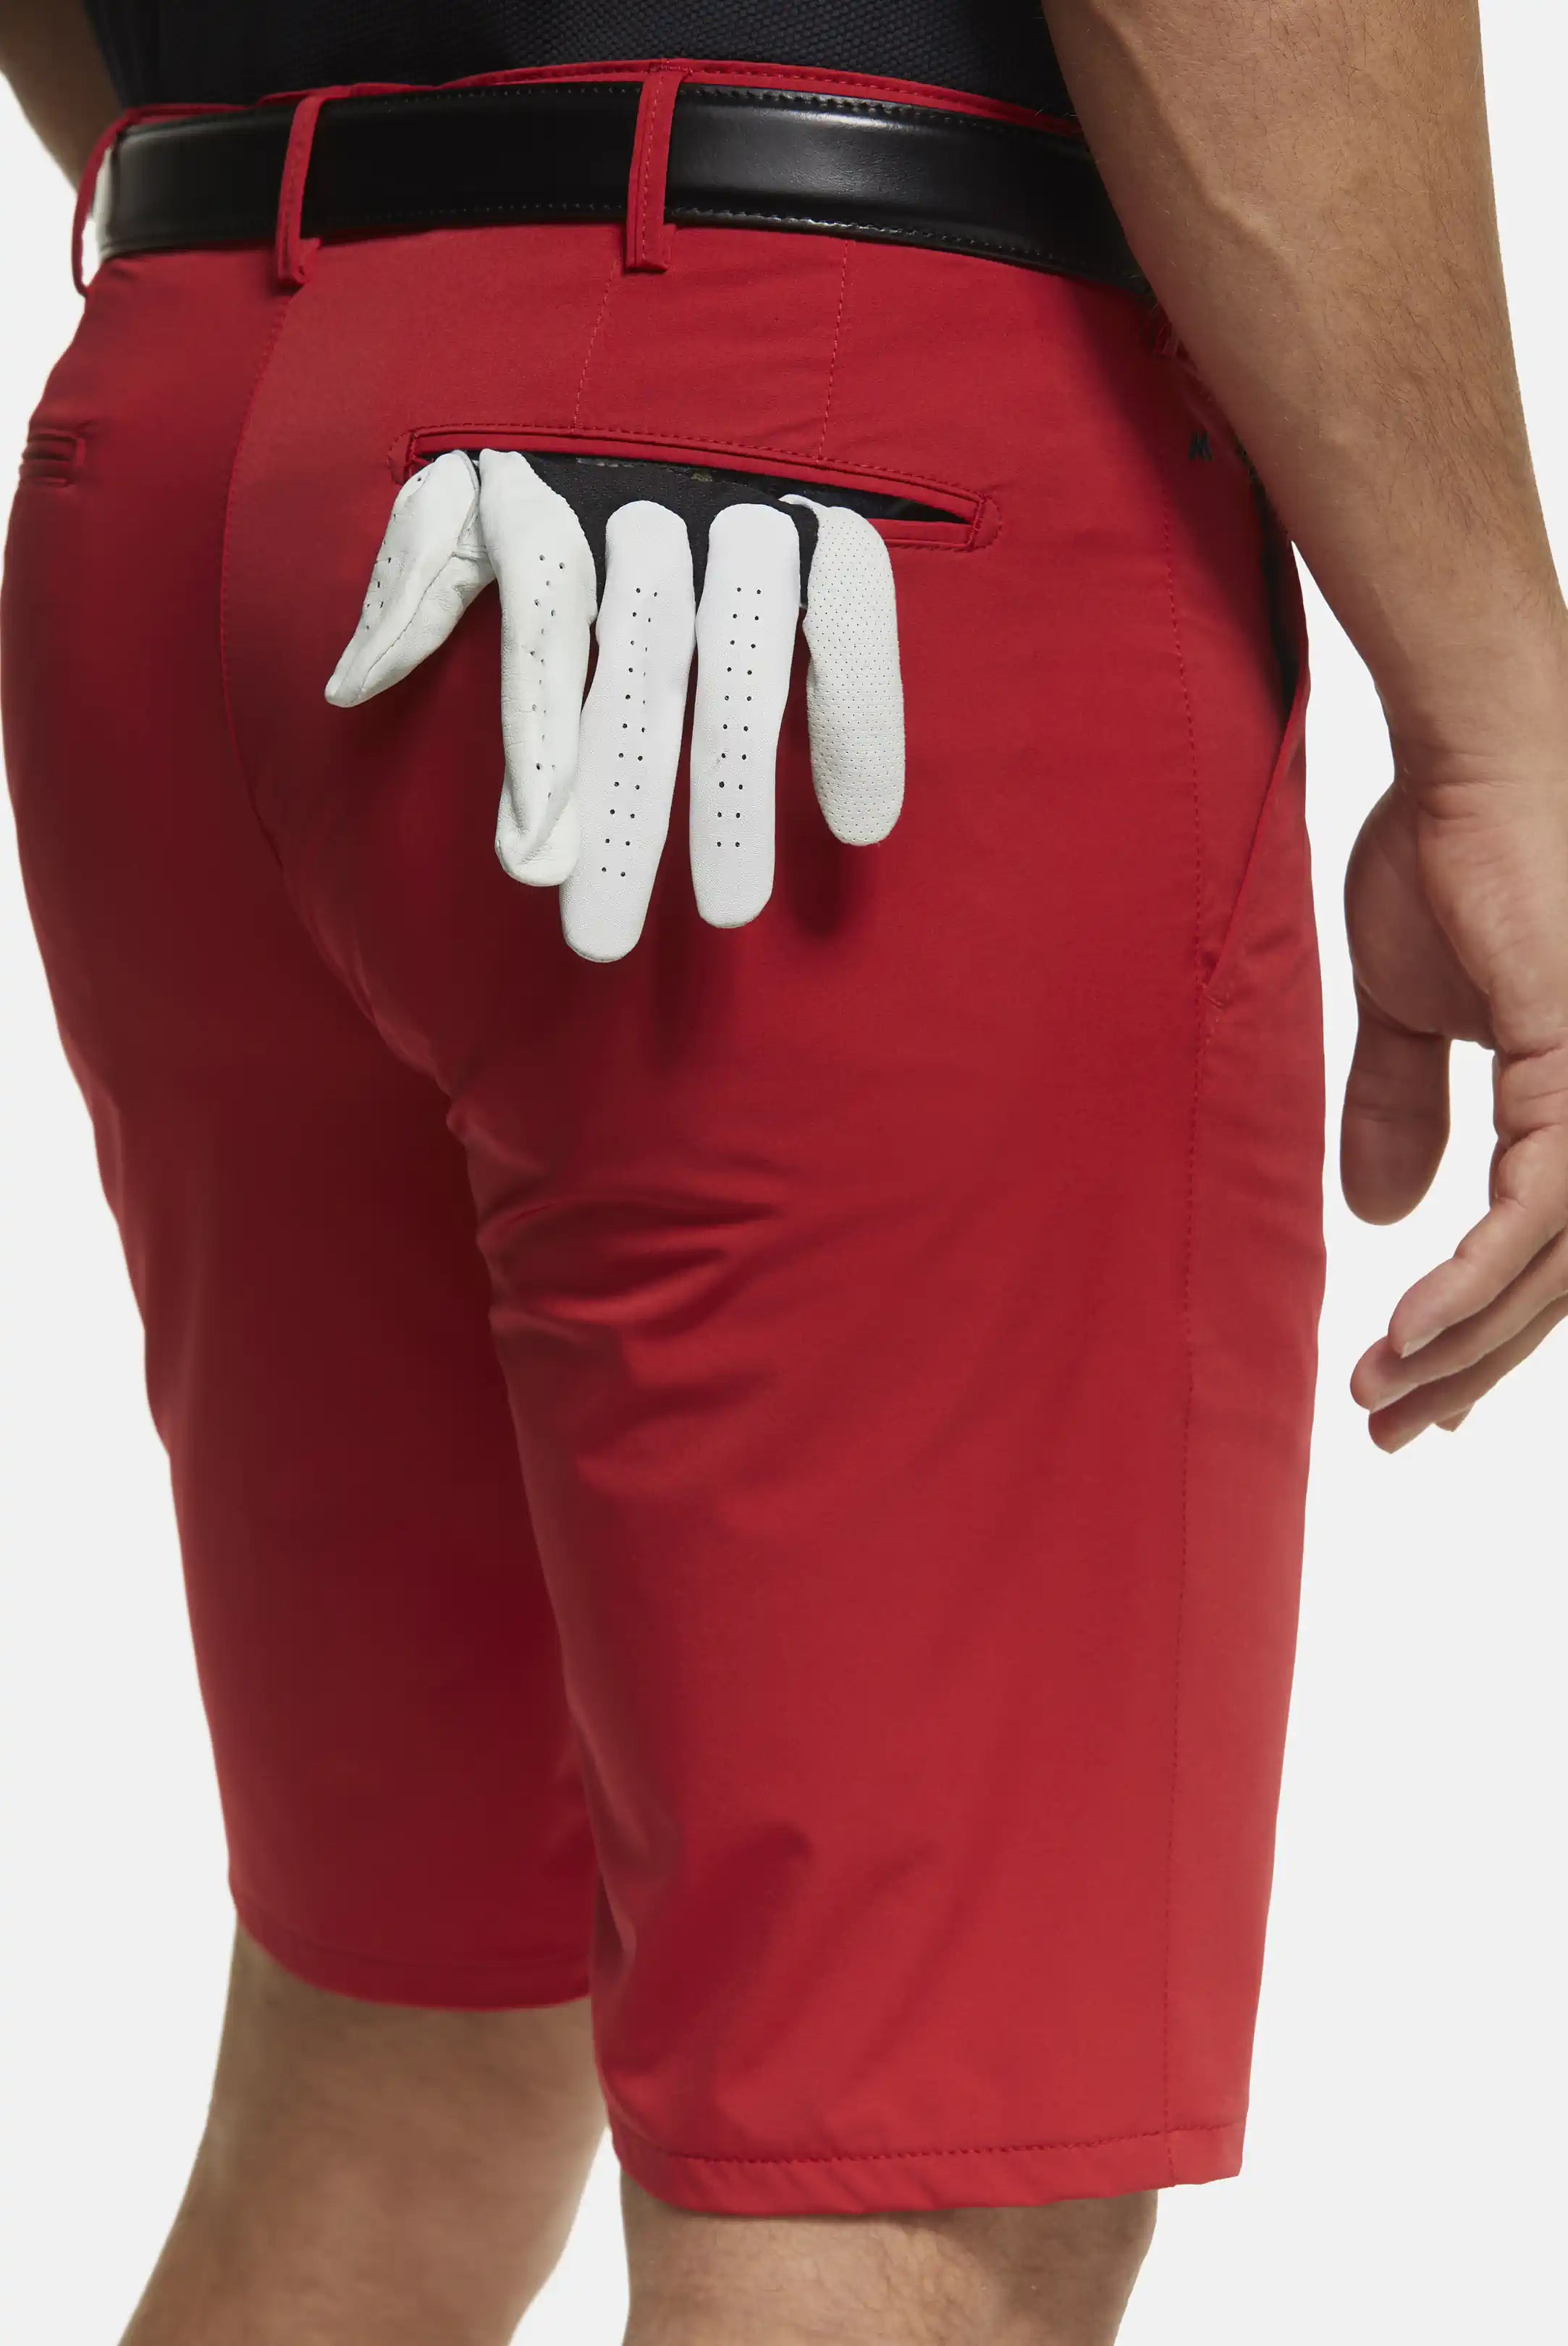 MEYER Golf Shorts - St. Andrews 8070 High Performance Cotton - Red